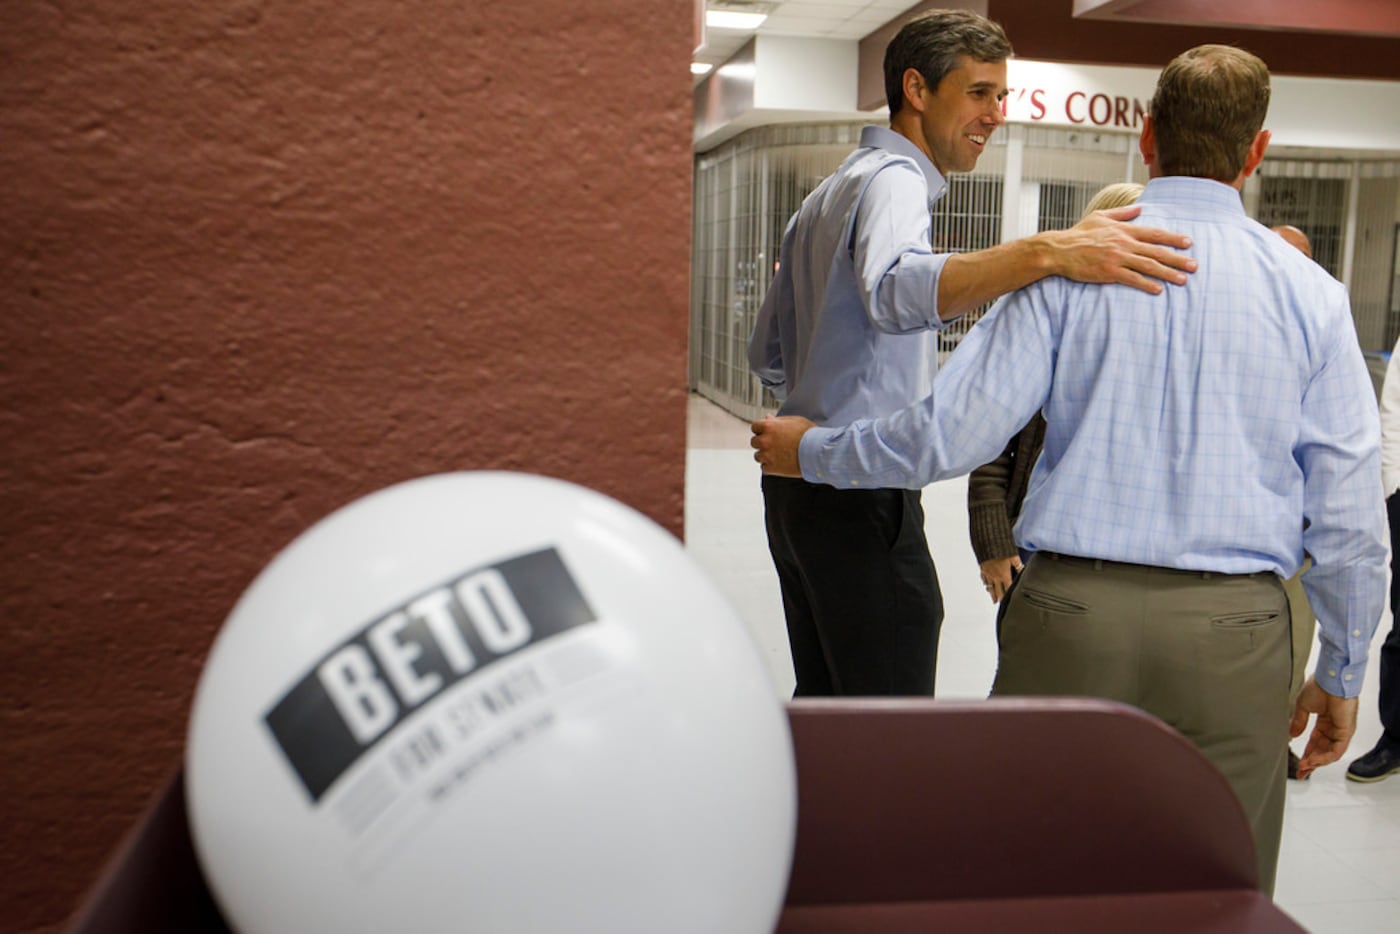 U.S. Rep. Beto O'Rourke greeted Adam Bell, a Democratic candidate for Congressional District...